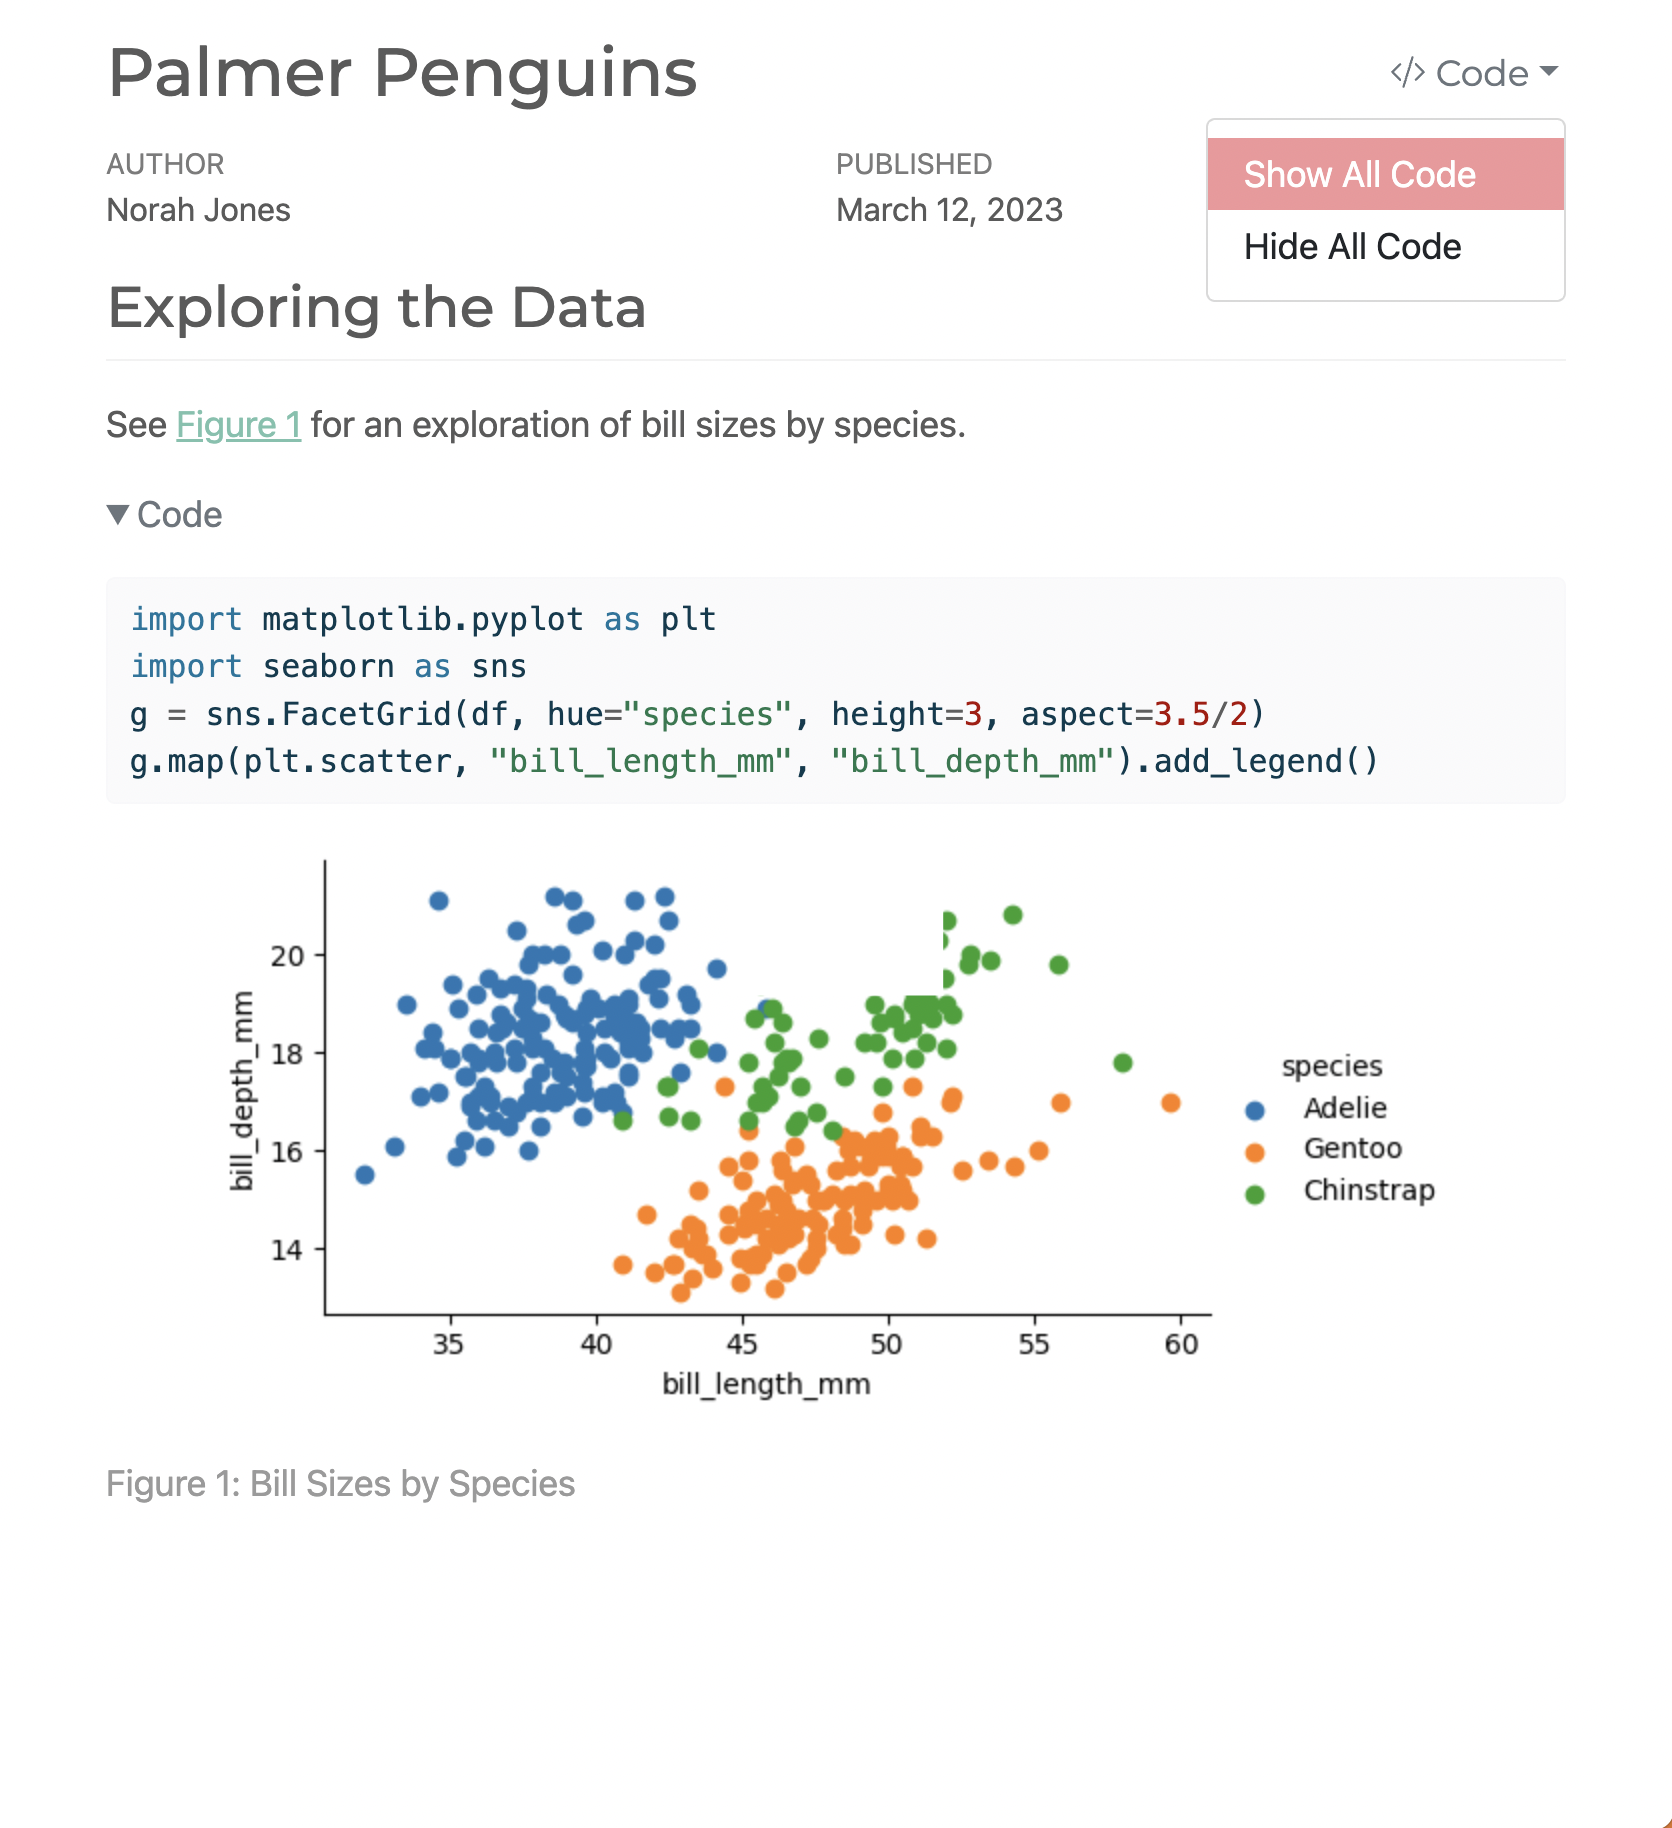 Sample Python project outputs showing data analysis and visualizations.